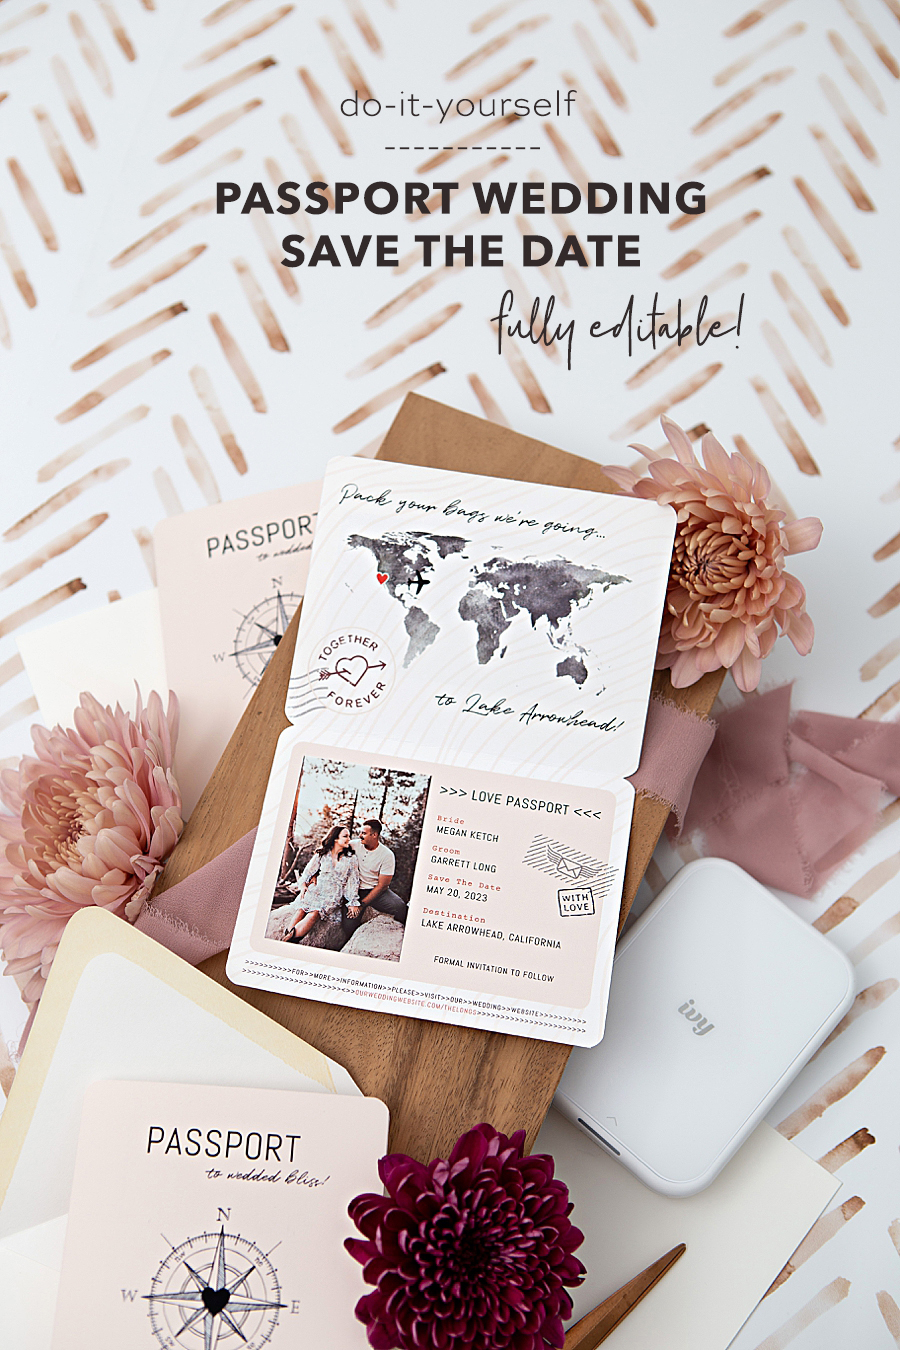 Make your own stunning passport save the date invitations!